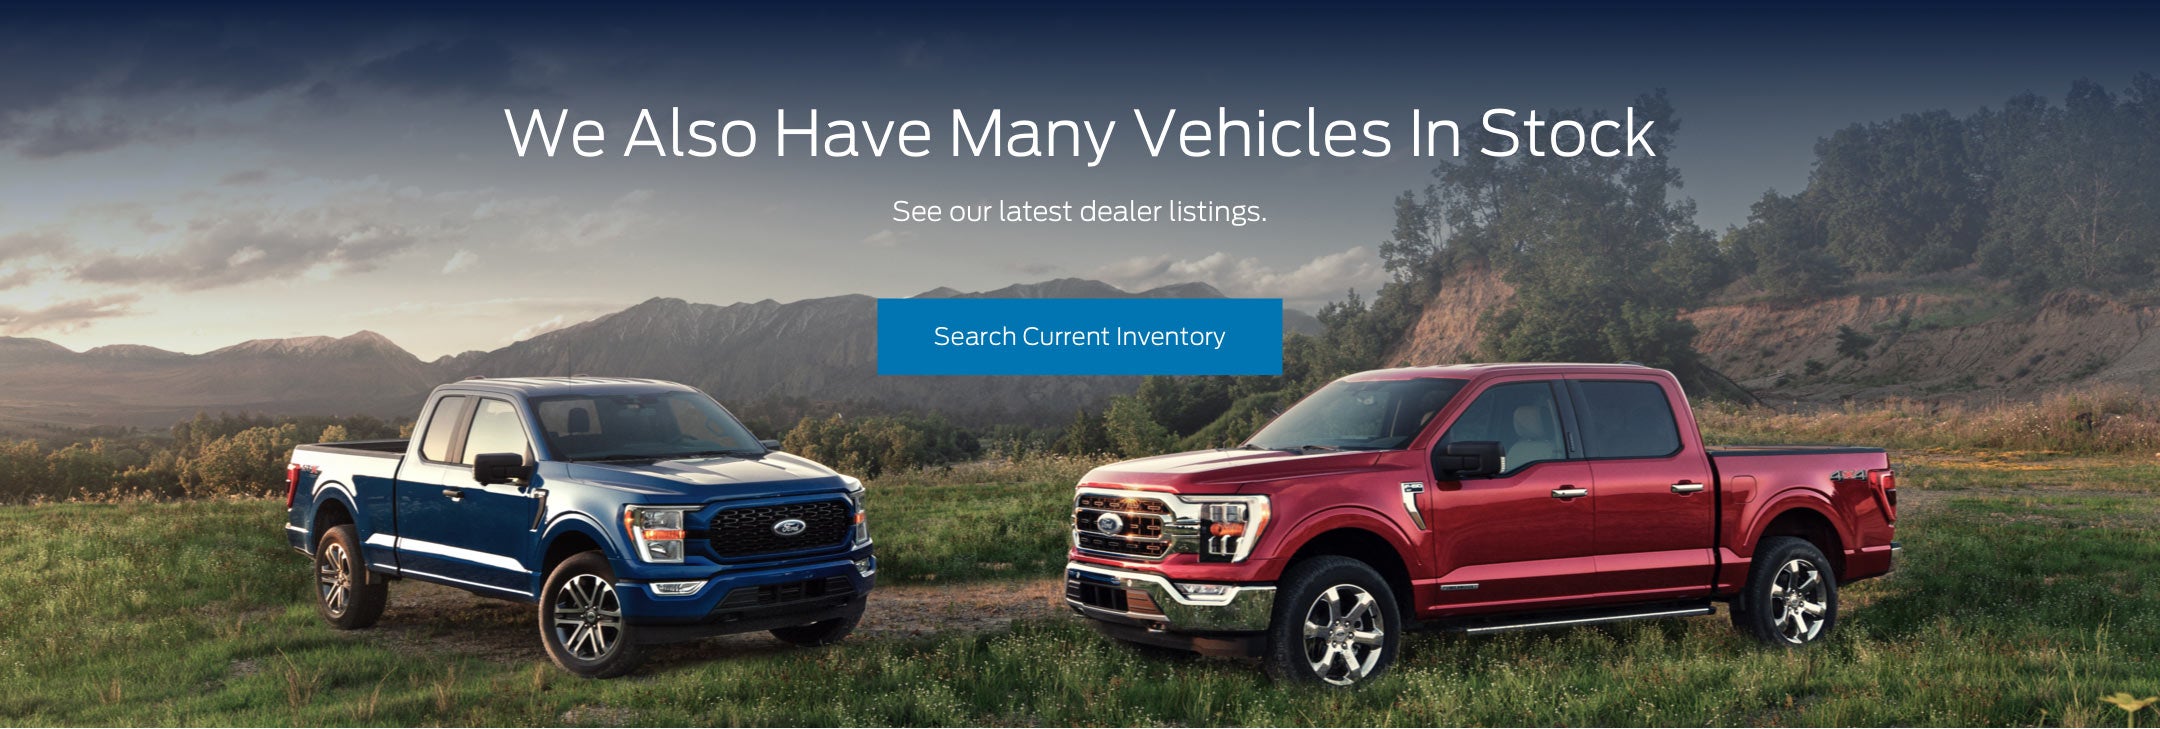 Ford vehicles in stock | Ford of Ocala in Ocala FL